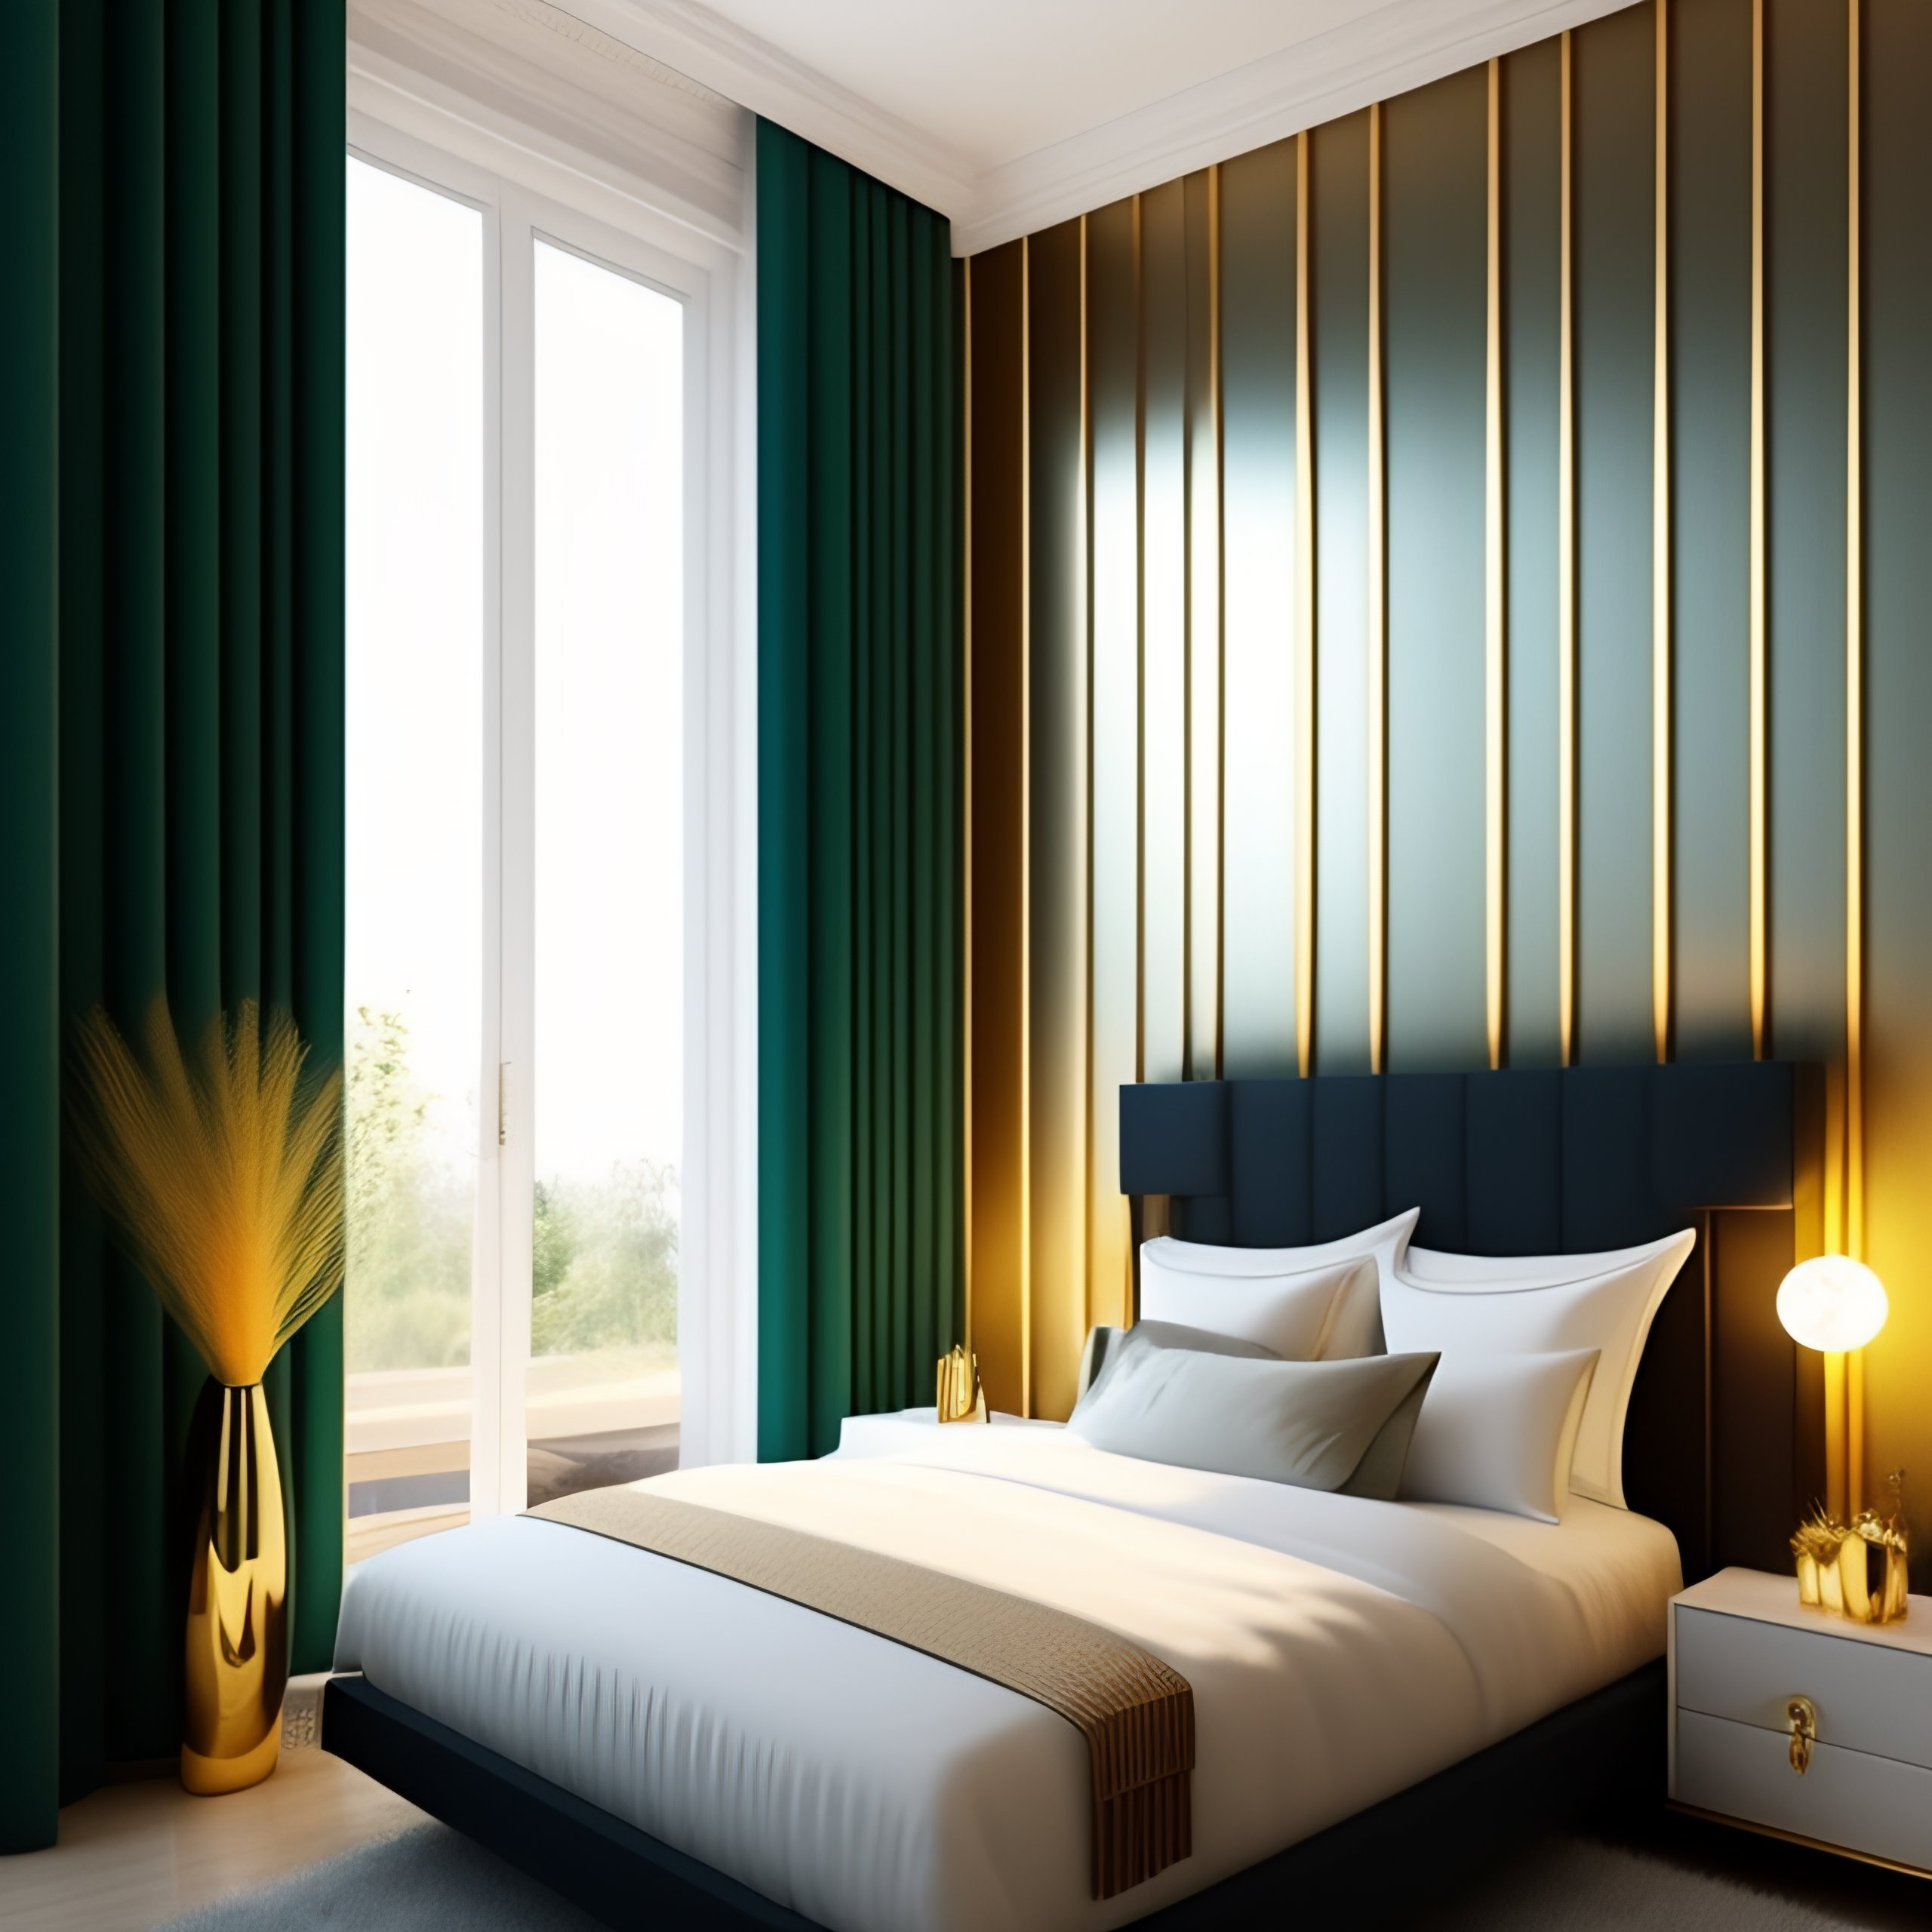 Lexica - Seagreen and golden small bedroom golden tape lines on wall